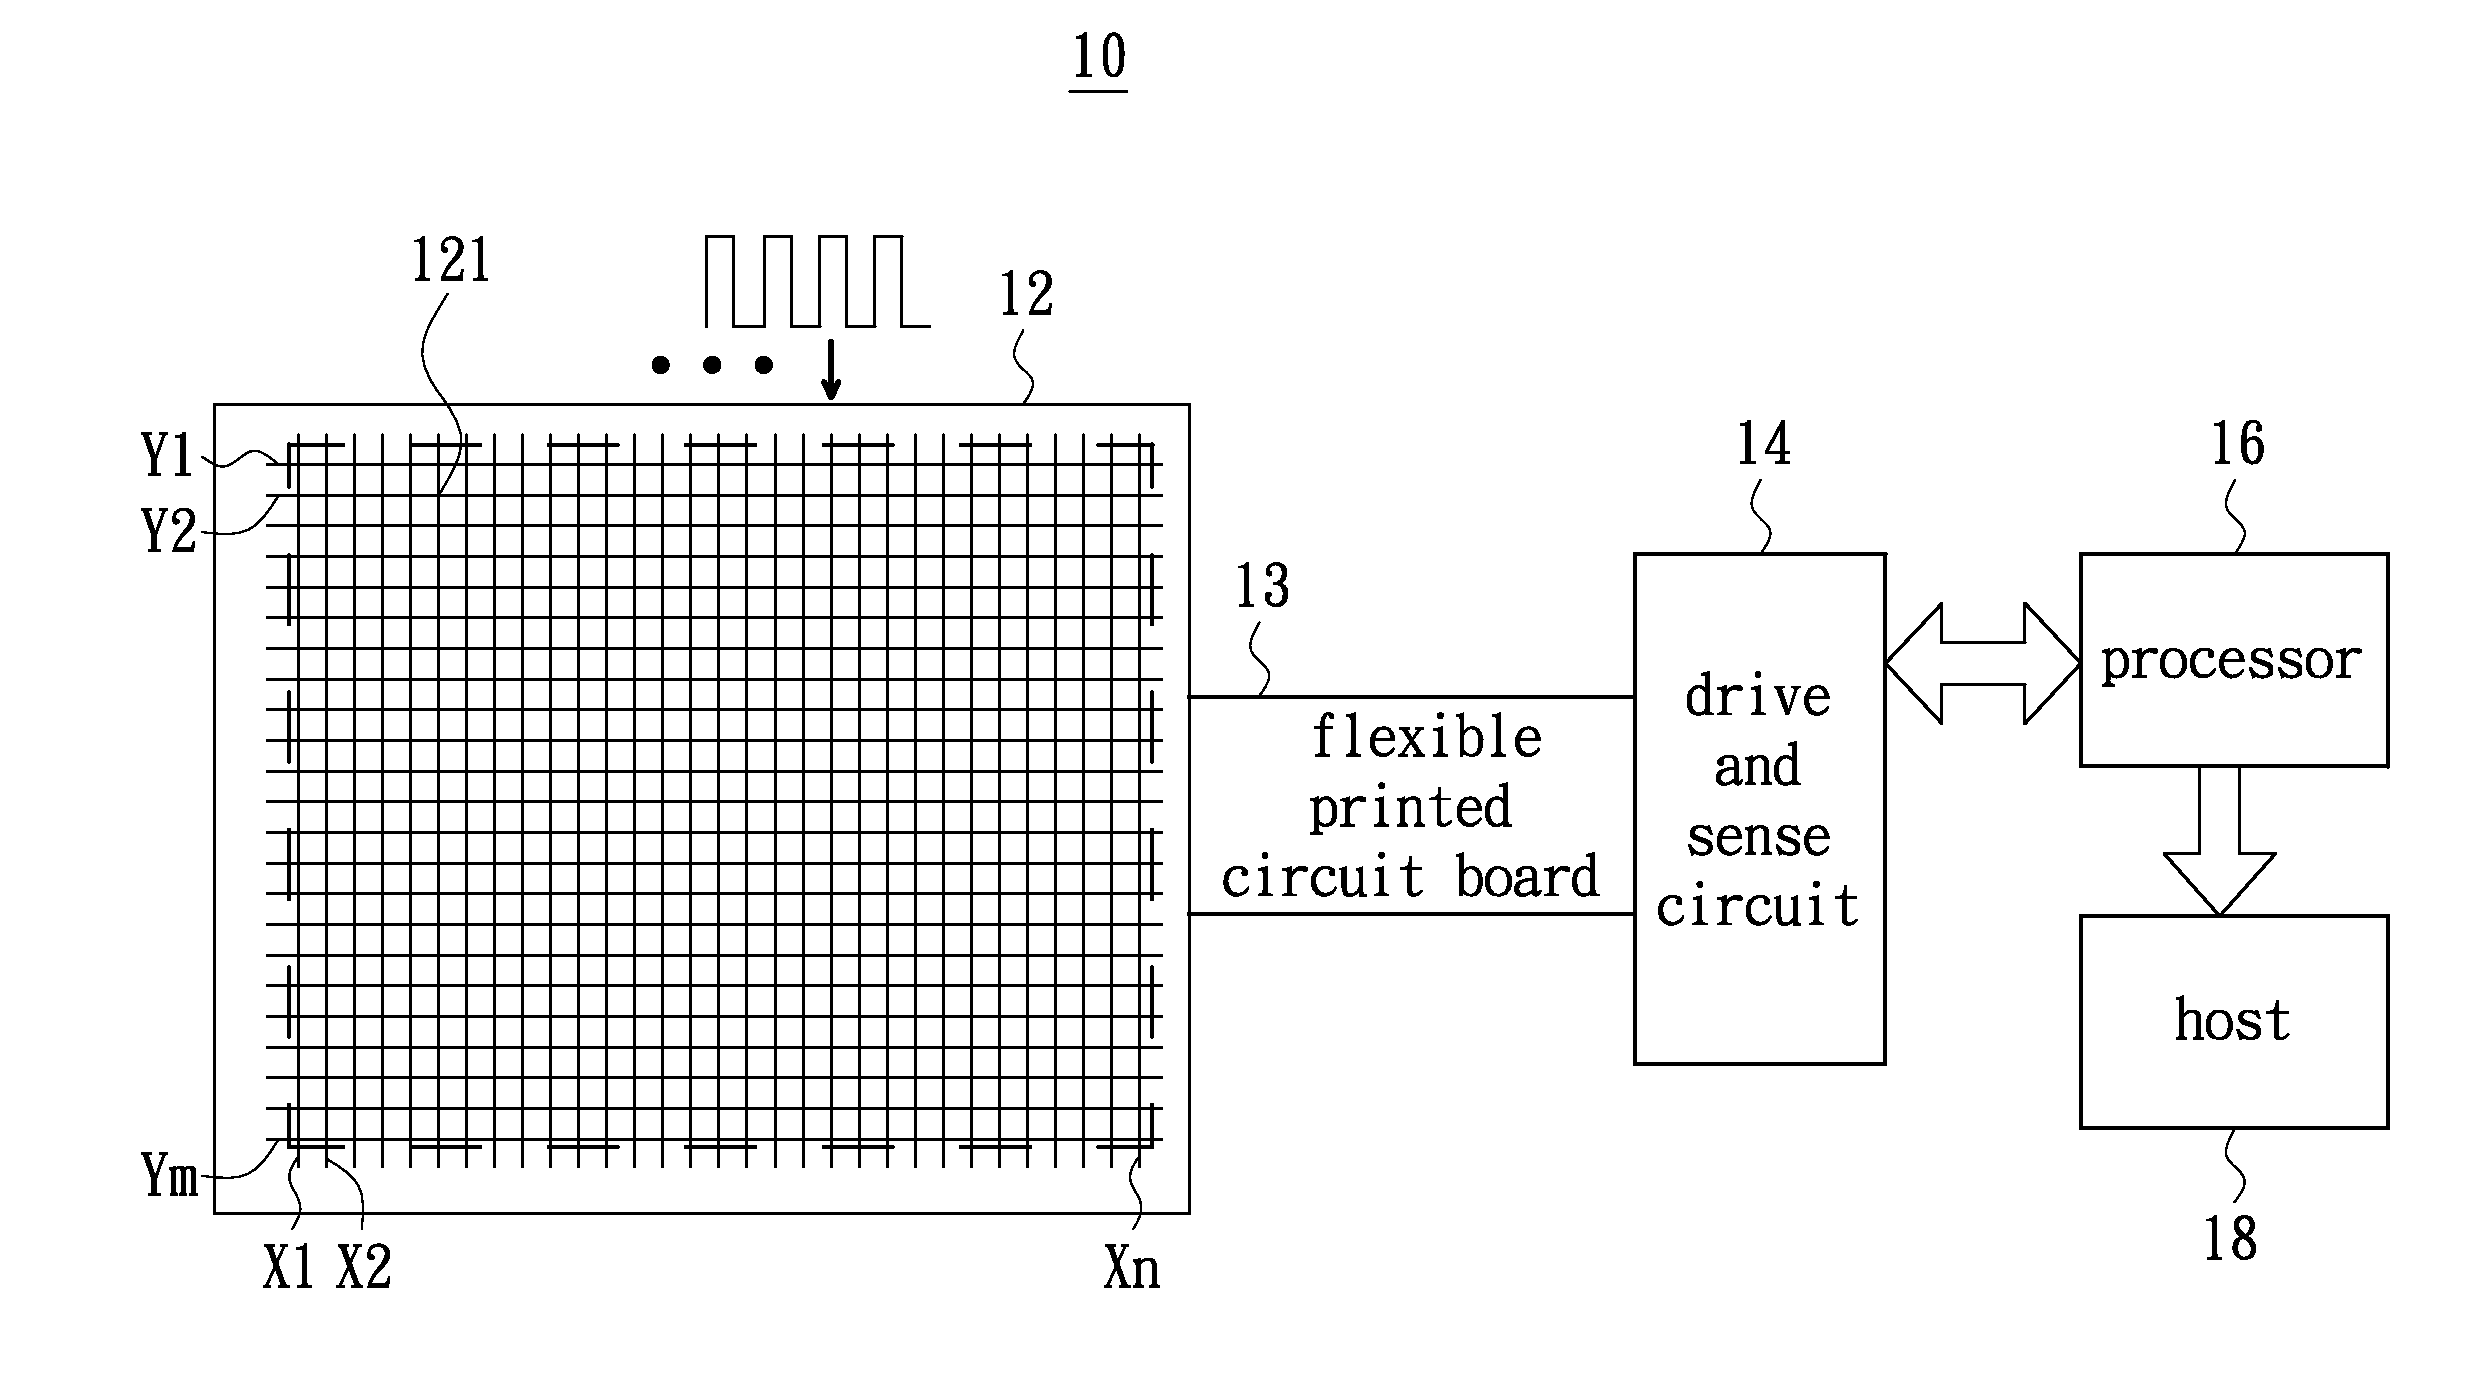 Threshold compensation method on touch device